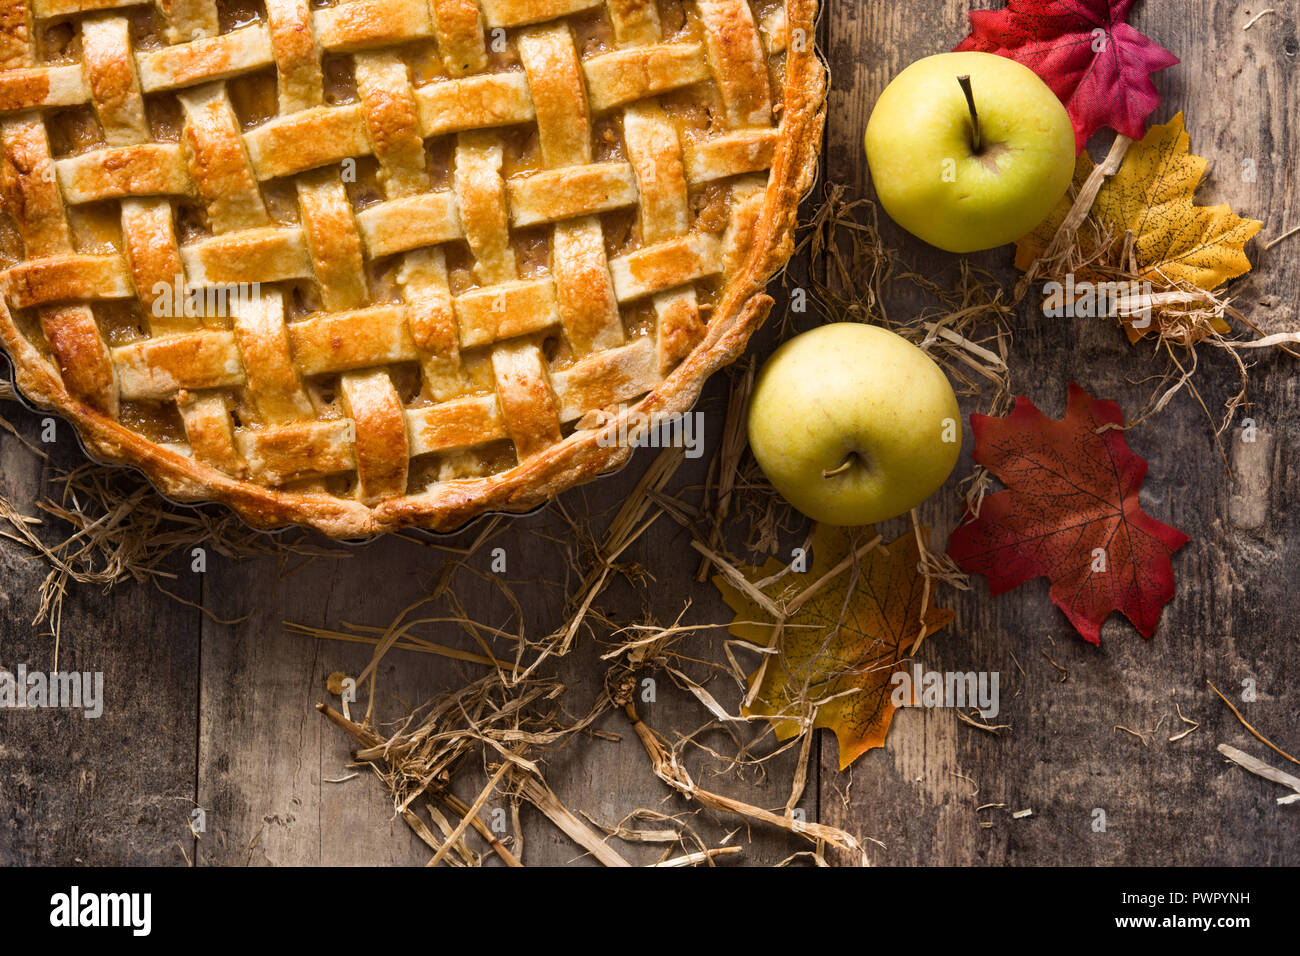 Homemade traditional apple pie on wooden table. Top view Stock Photo